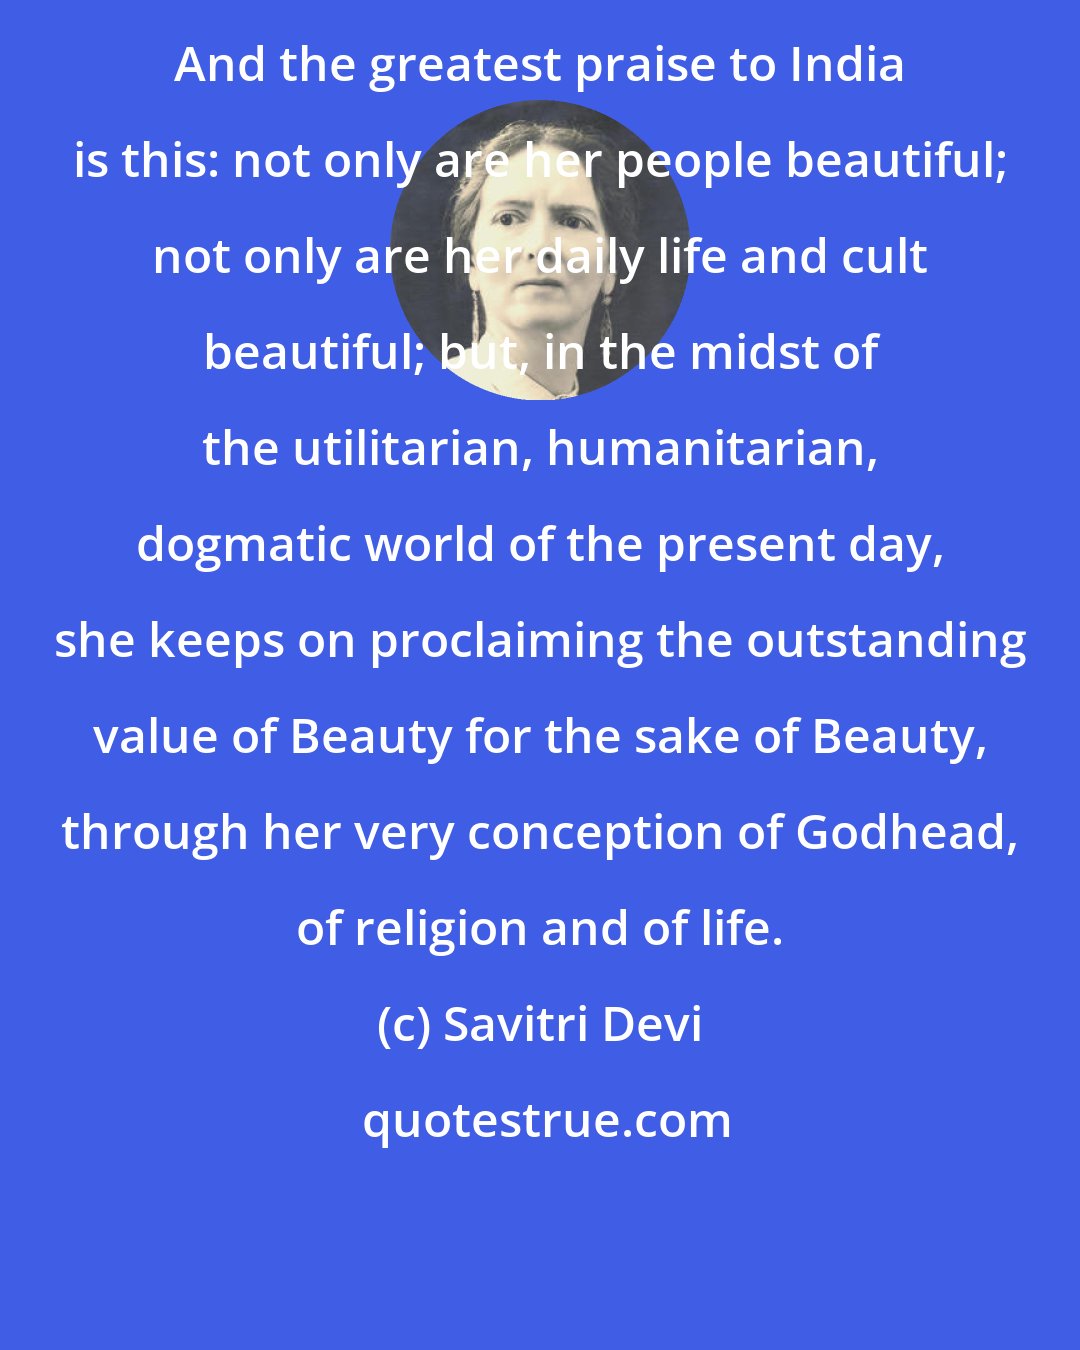 Savitri Devi: And the greatest praise to India is this: not only are her people beautiful; not only are her daily life and cult beautiful; but, in the midst of the utilitarian, humanitarian, dogmatic world of the present day, she keeps on proclaiming the outstanding value of Beauty for the sake of Beauty, through her very conception of Godhead, of religion and of life.